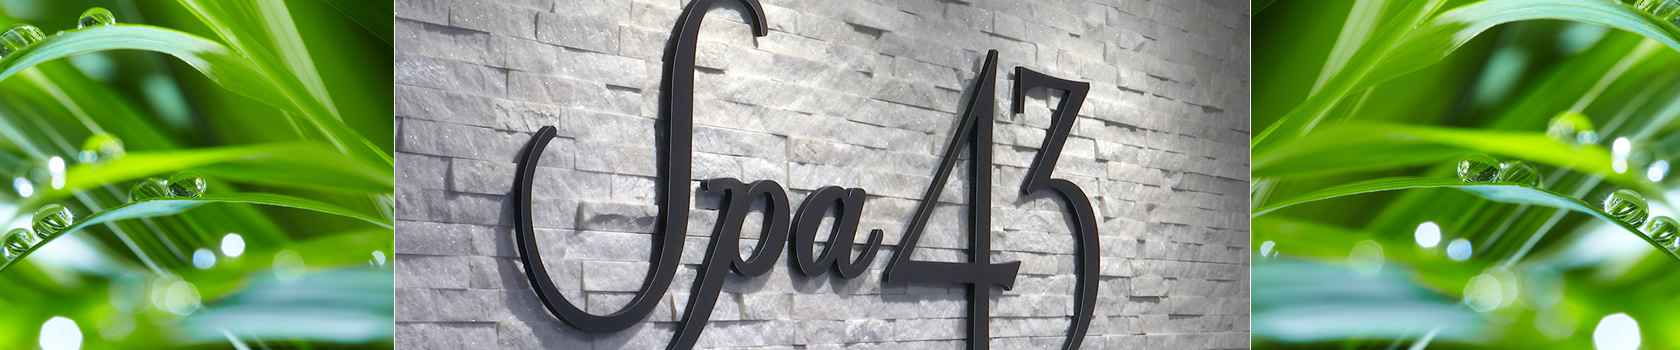 Spa 43 Cosmetic and Laser Center Clinton Township, Mi